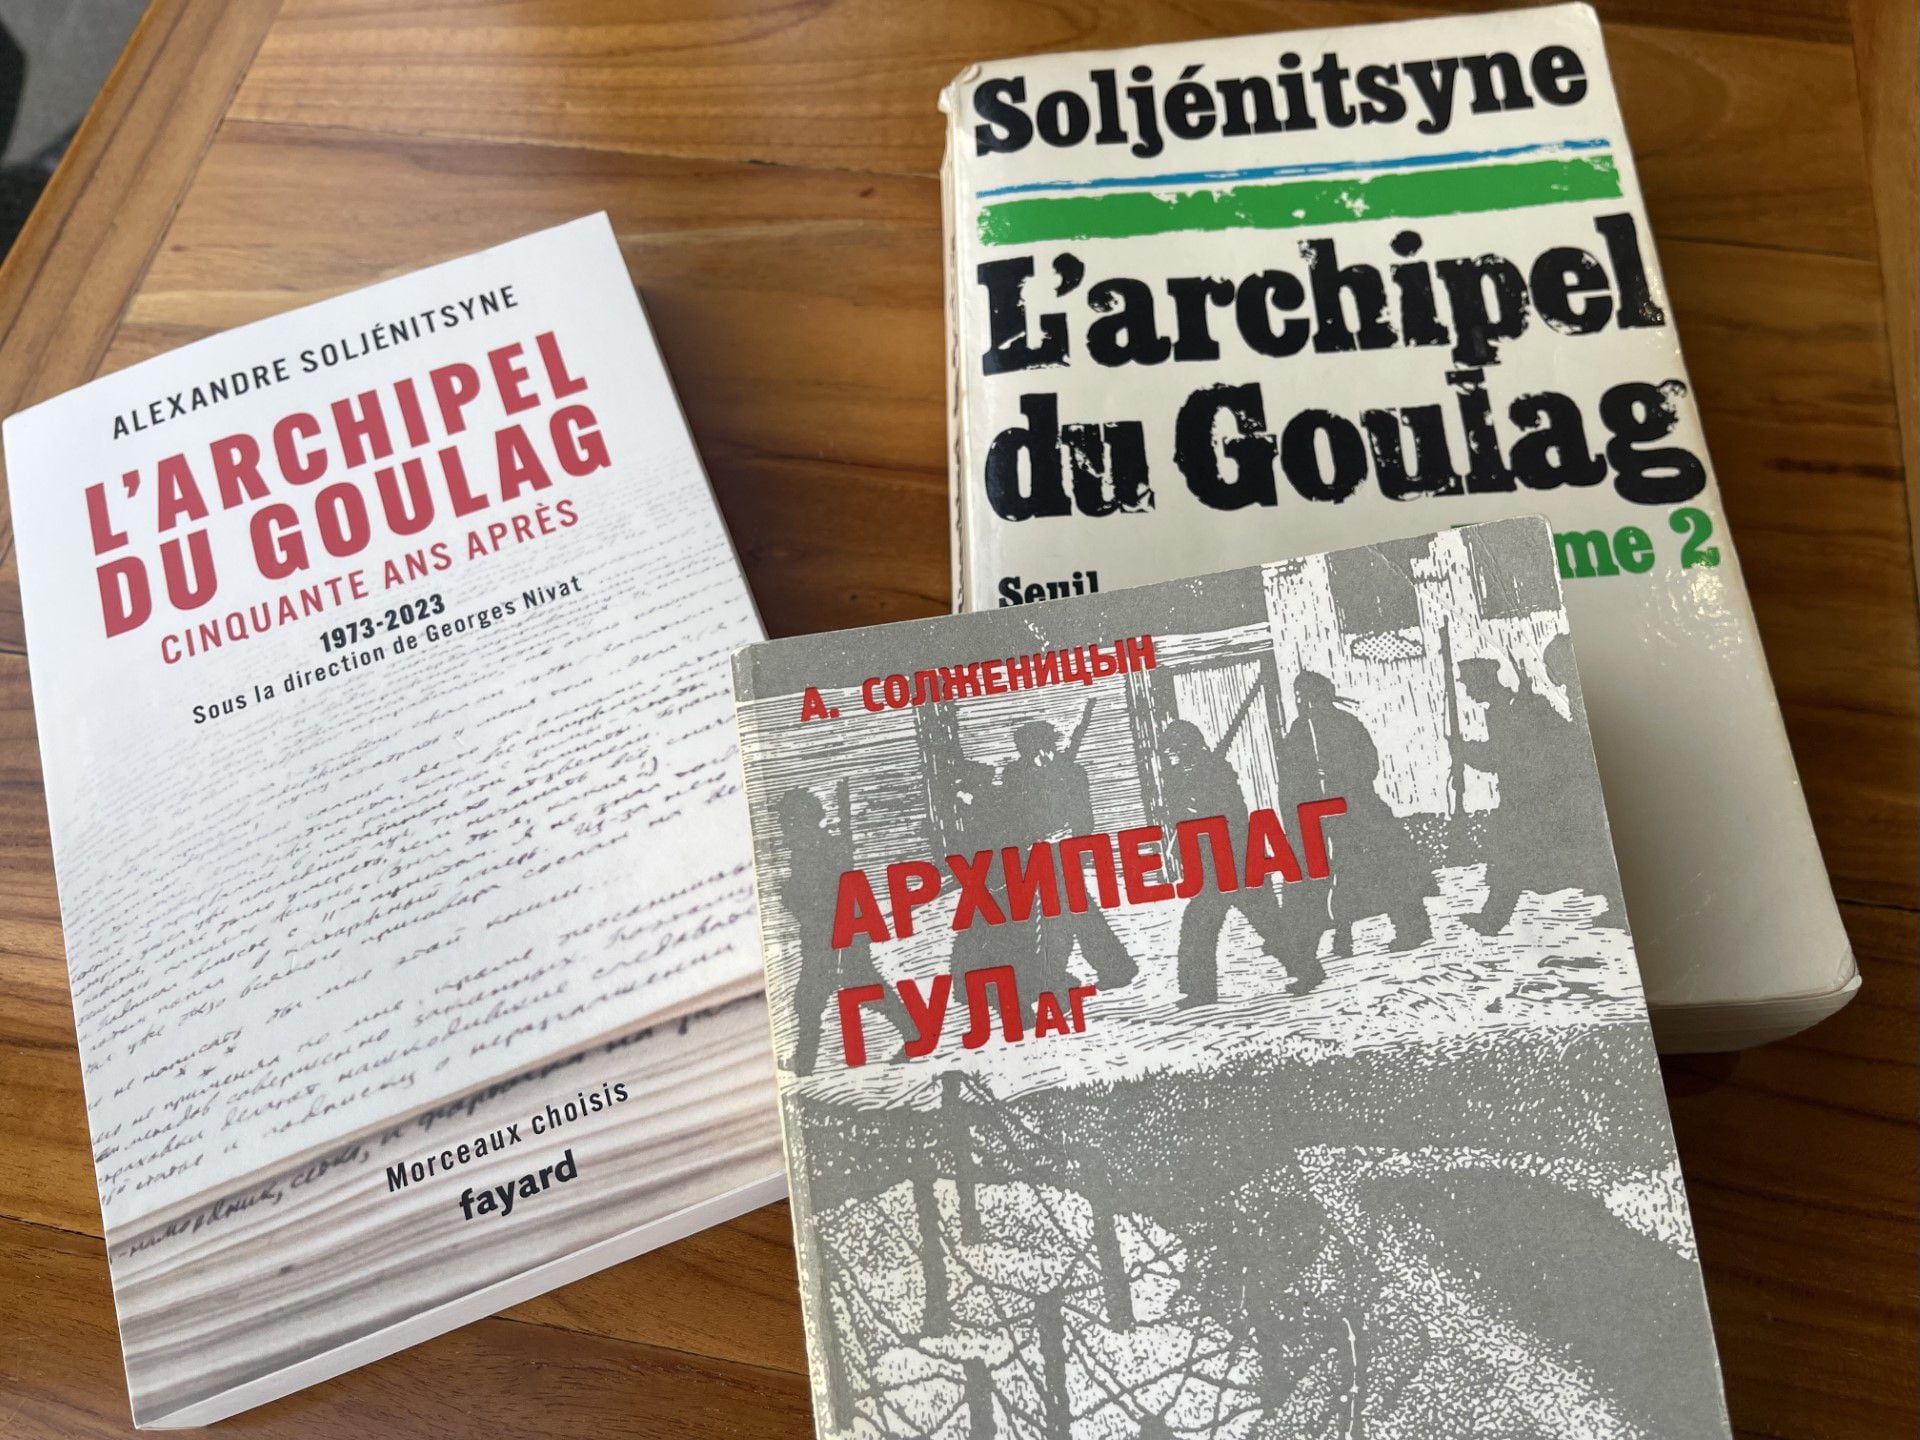 The original editions in Russian and French of L'Archipel du gulag and the reissue by Fayard in 2023 of the pieces chosen under the direction of Georges Nivat.